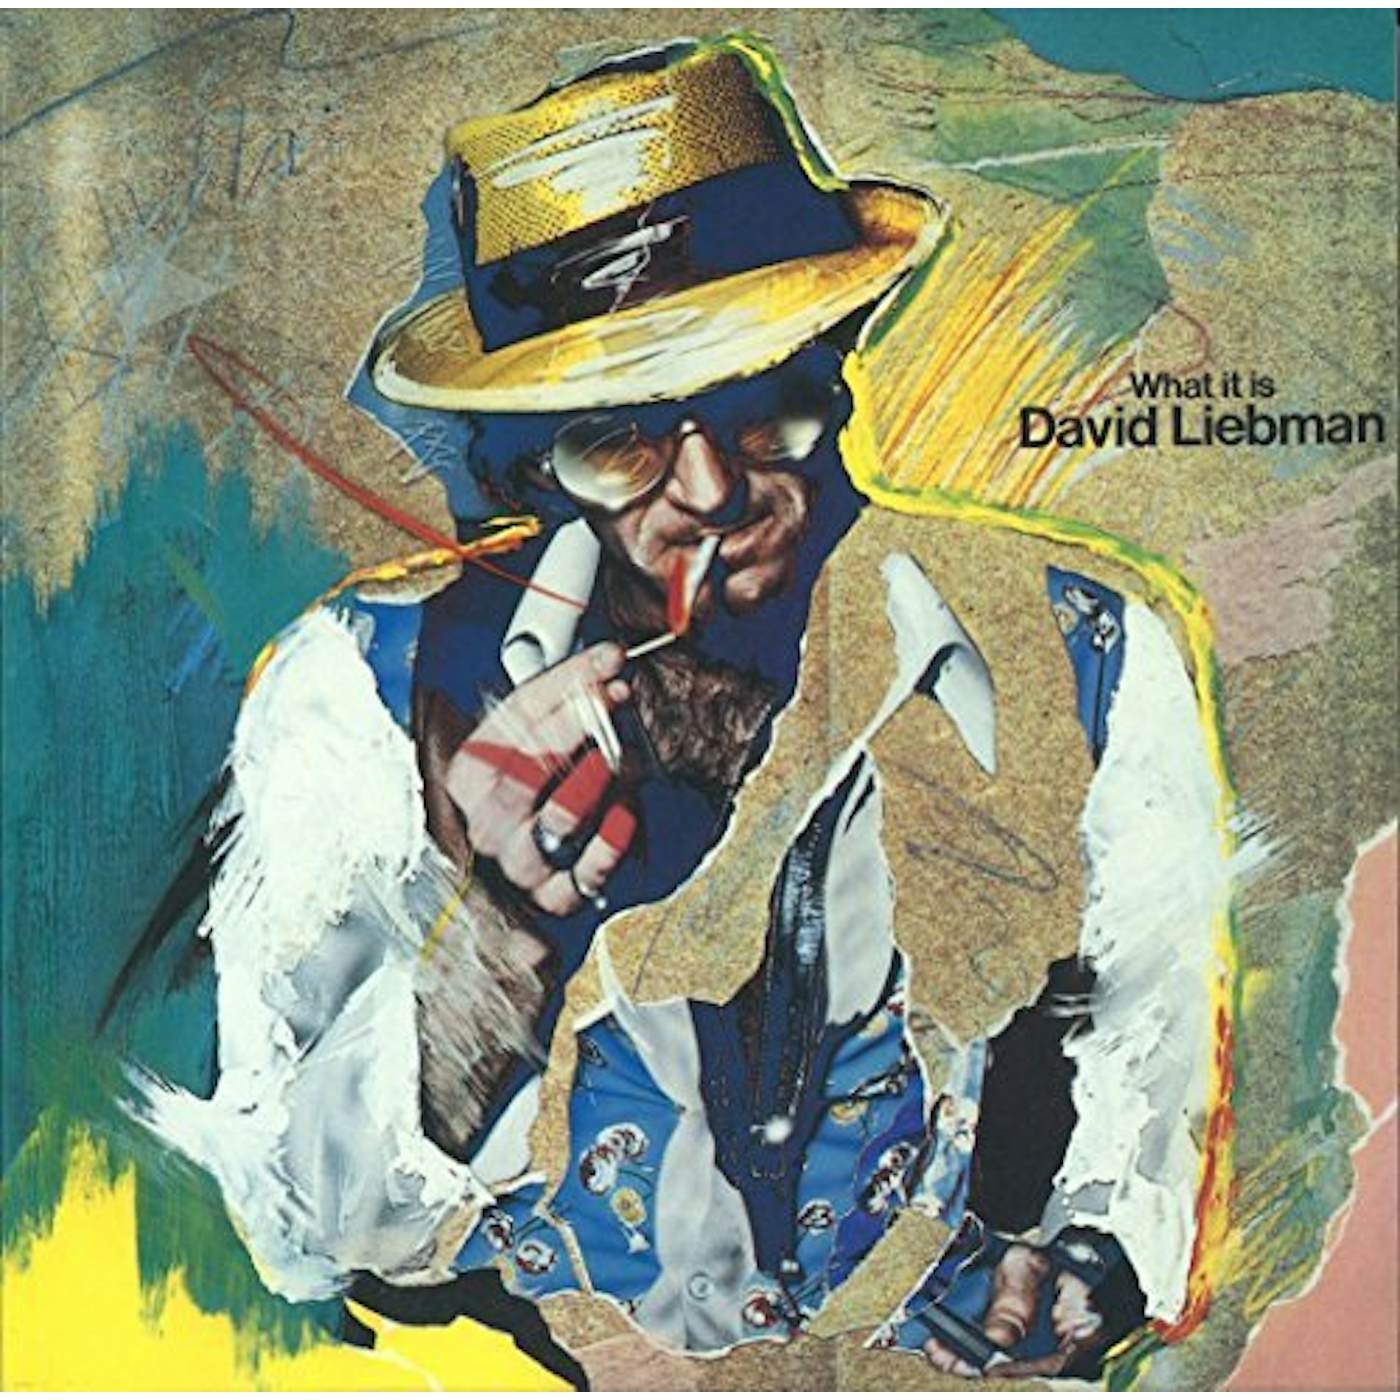 Dave Liebman WHAT IT IS CD